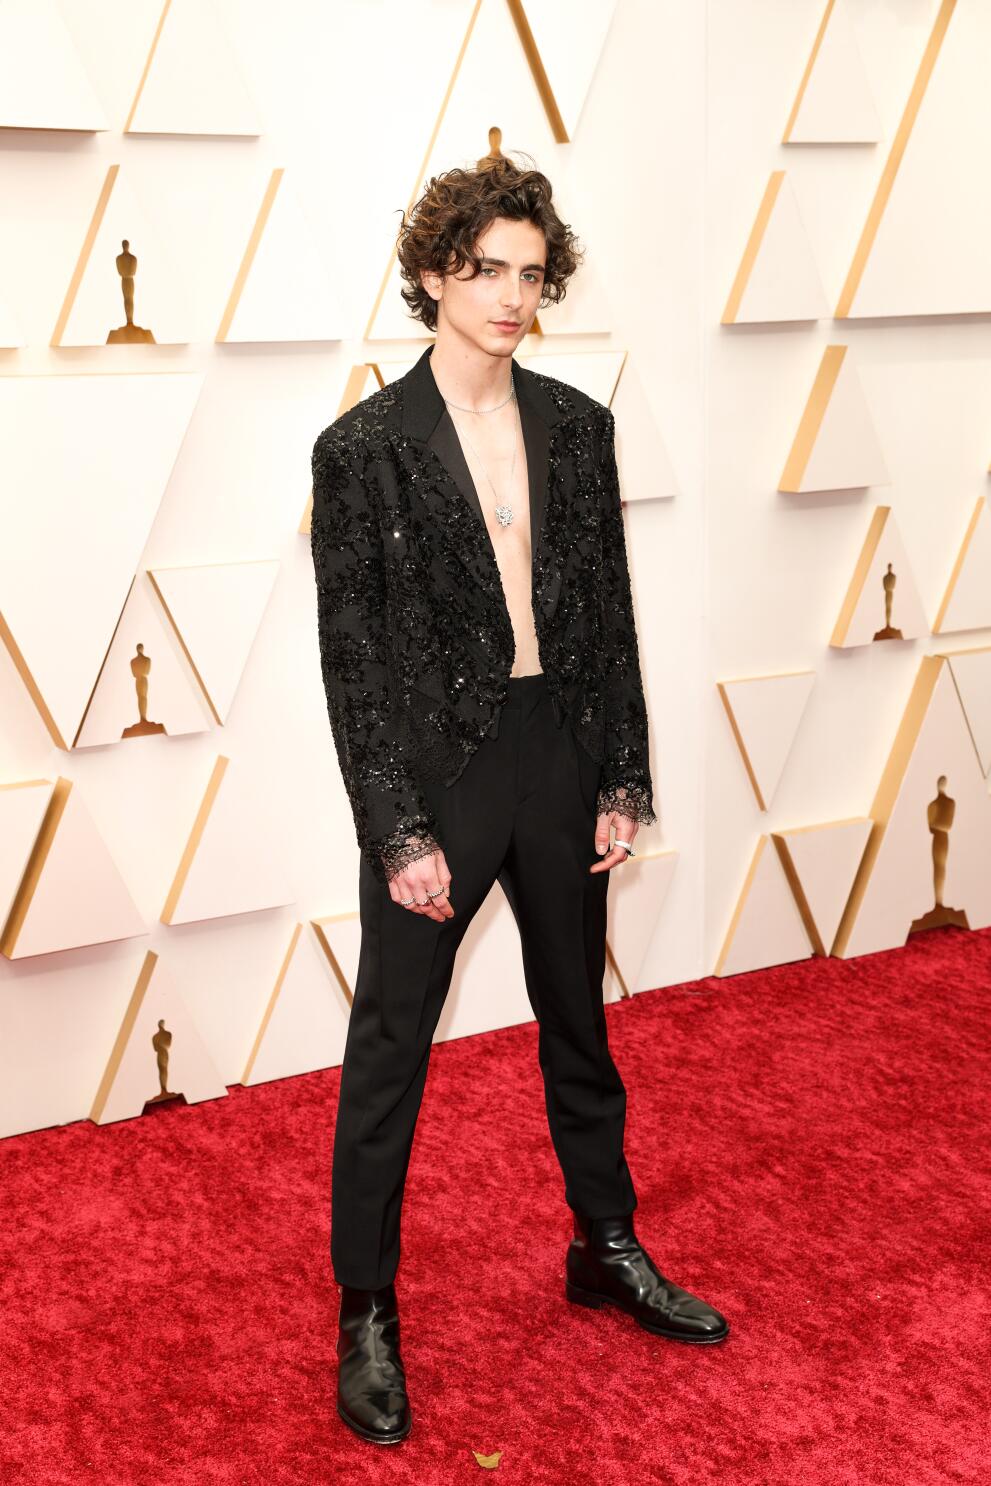 Timothée Chalamet's goes shirtless at the 2022 Oscars